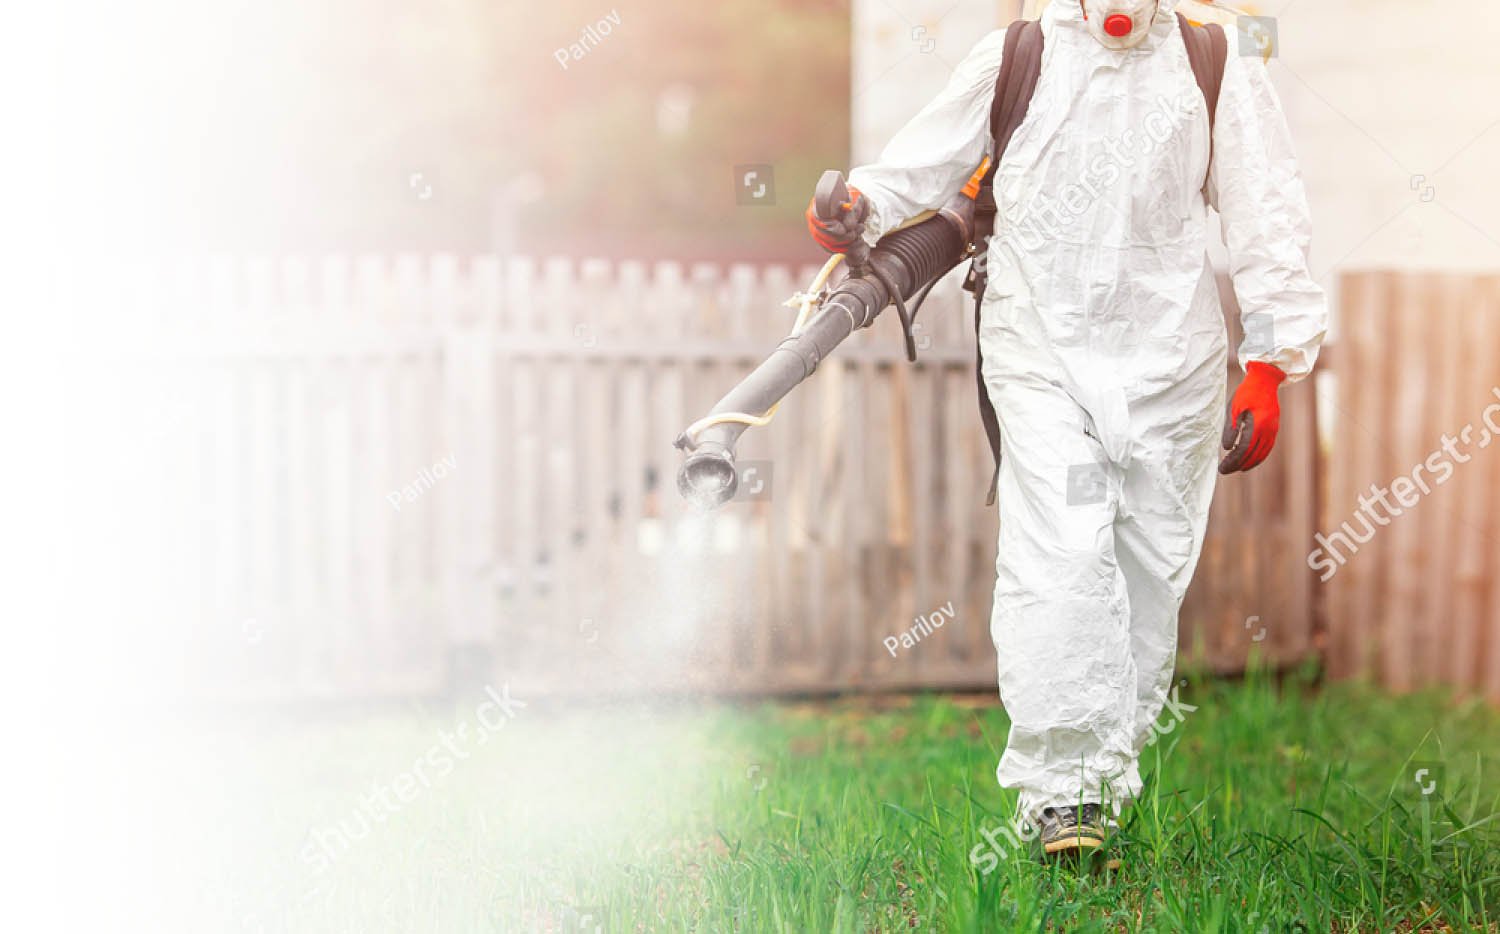 Maryland Pest Control Services - Bug Squashers